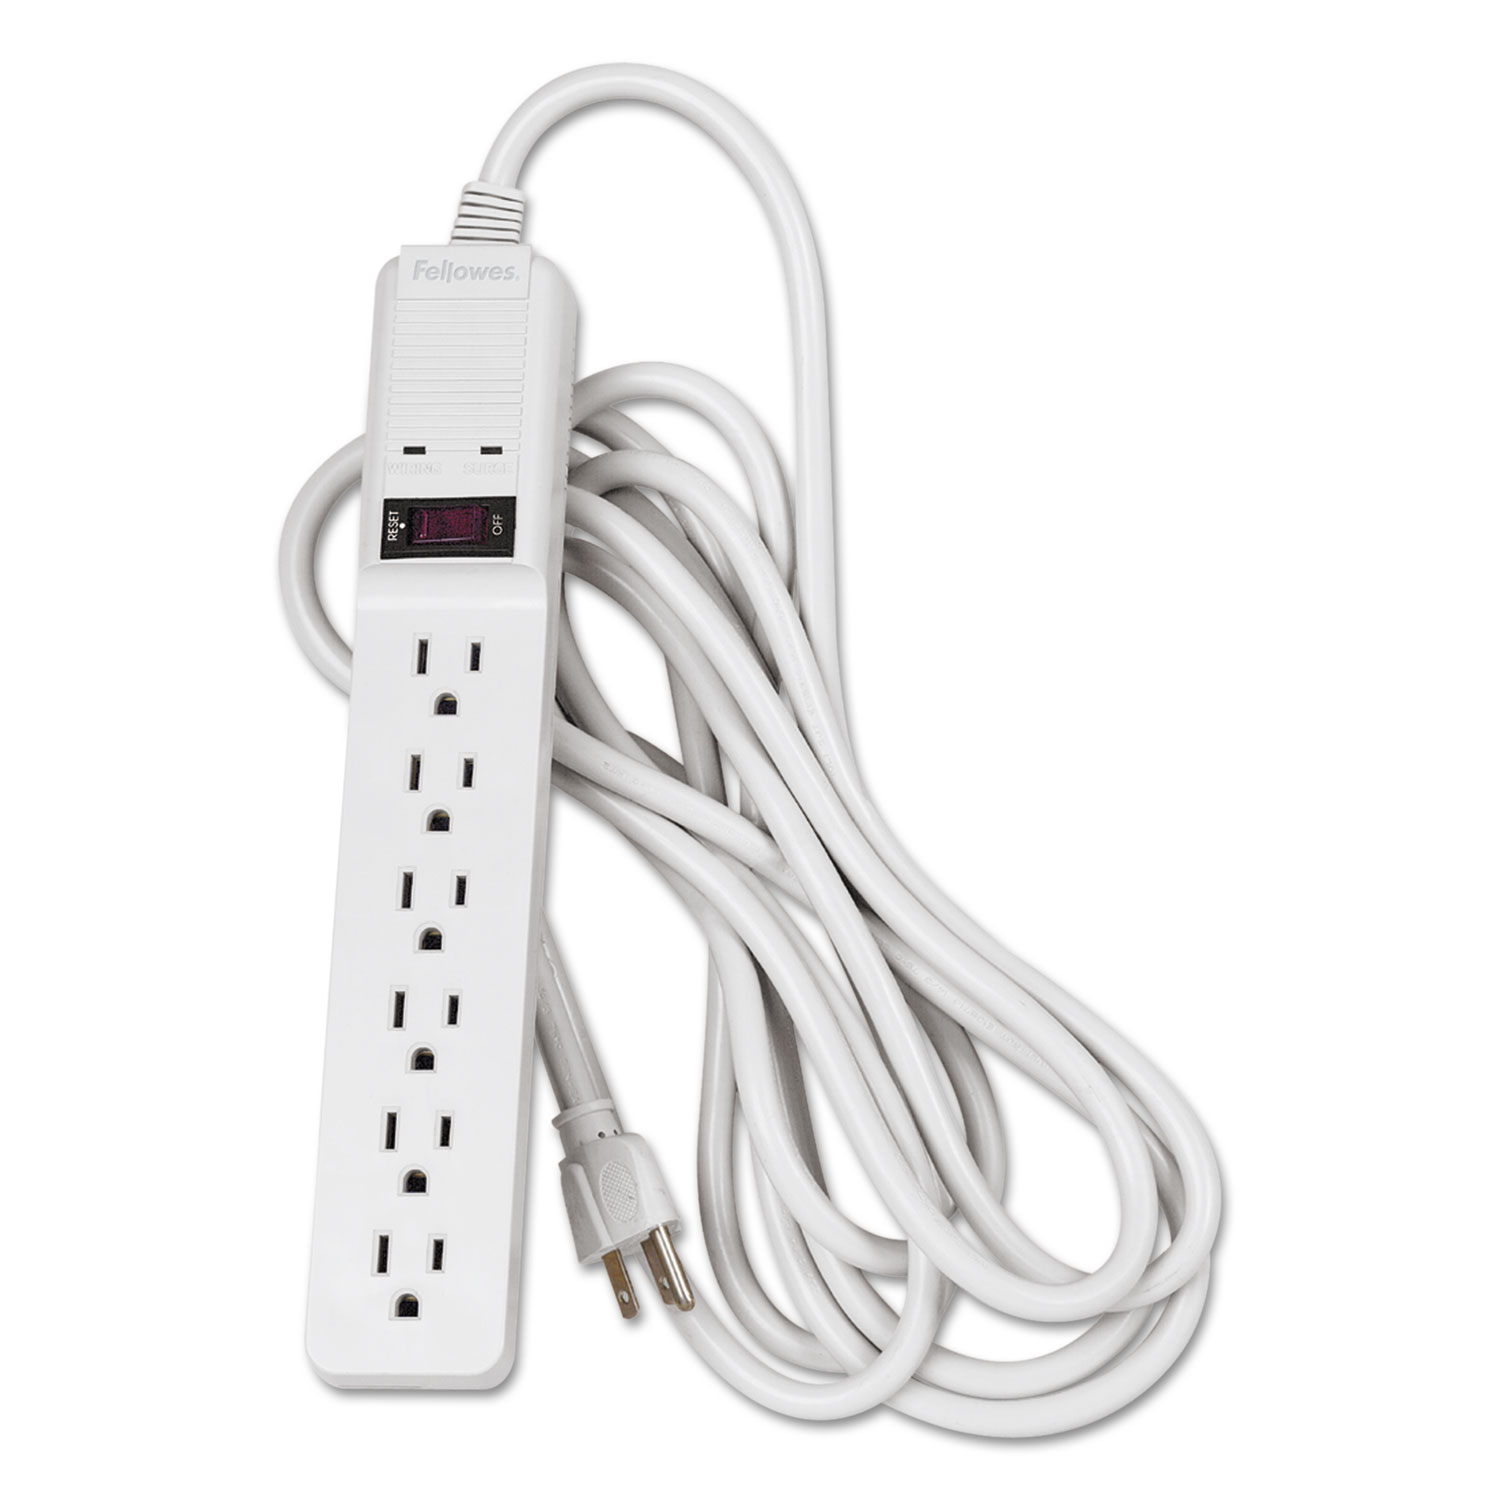  Fellowes 99036 Basic Home/Office Surge Protector, 6 Outlets, 15 ft Cord, 450 Joules, Platinum (FEL99036) 